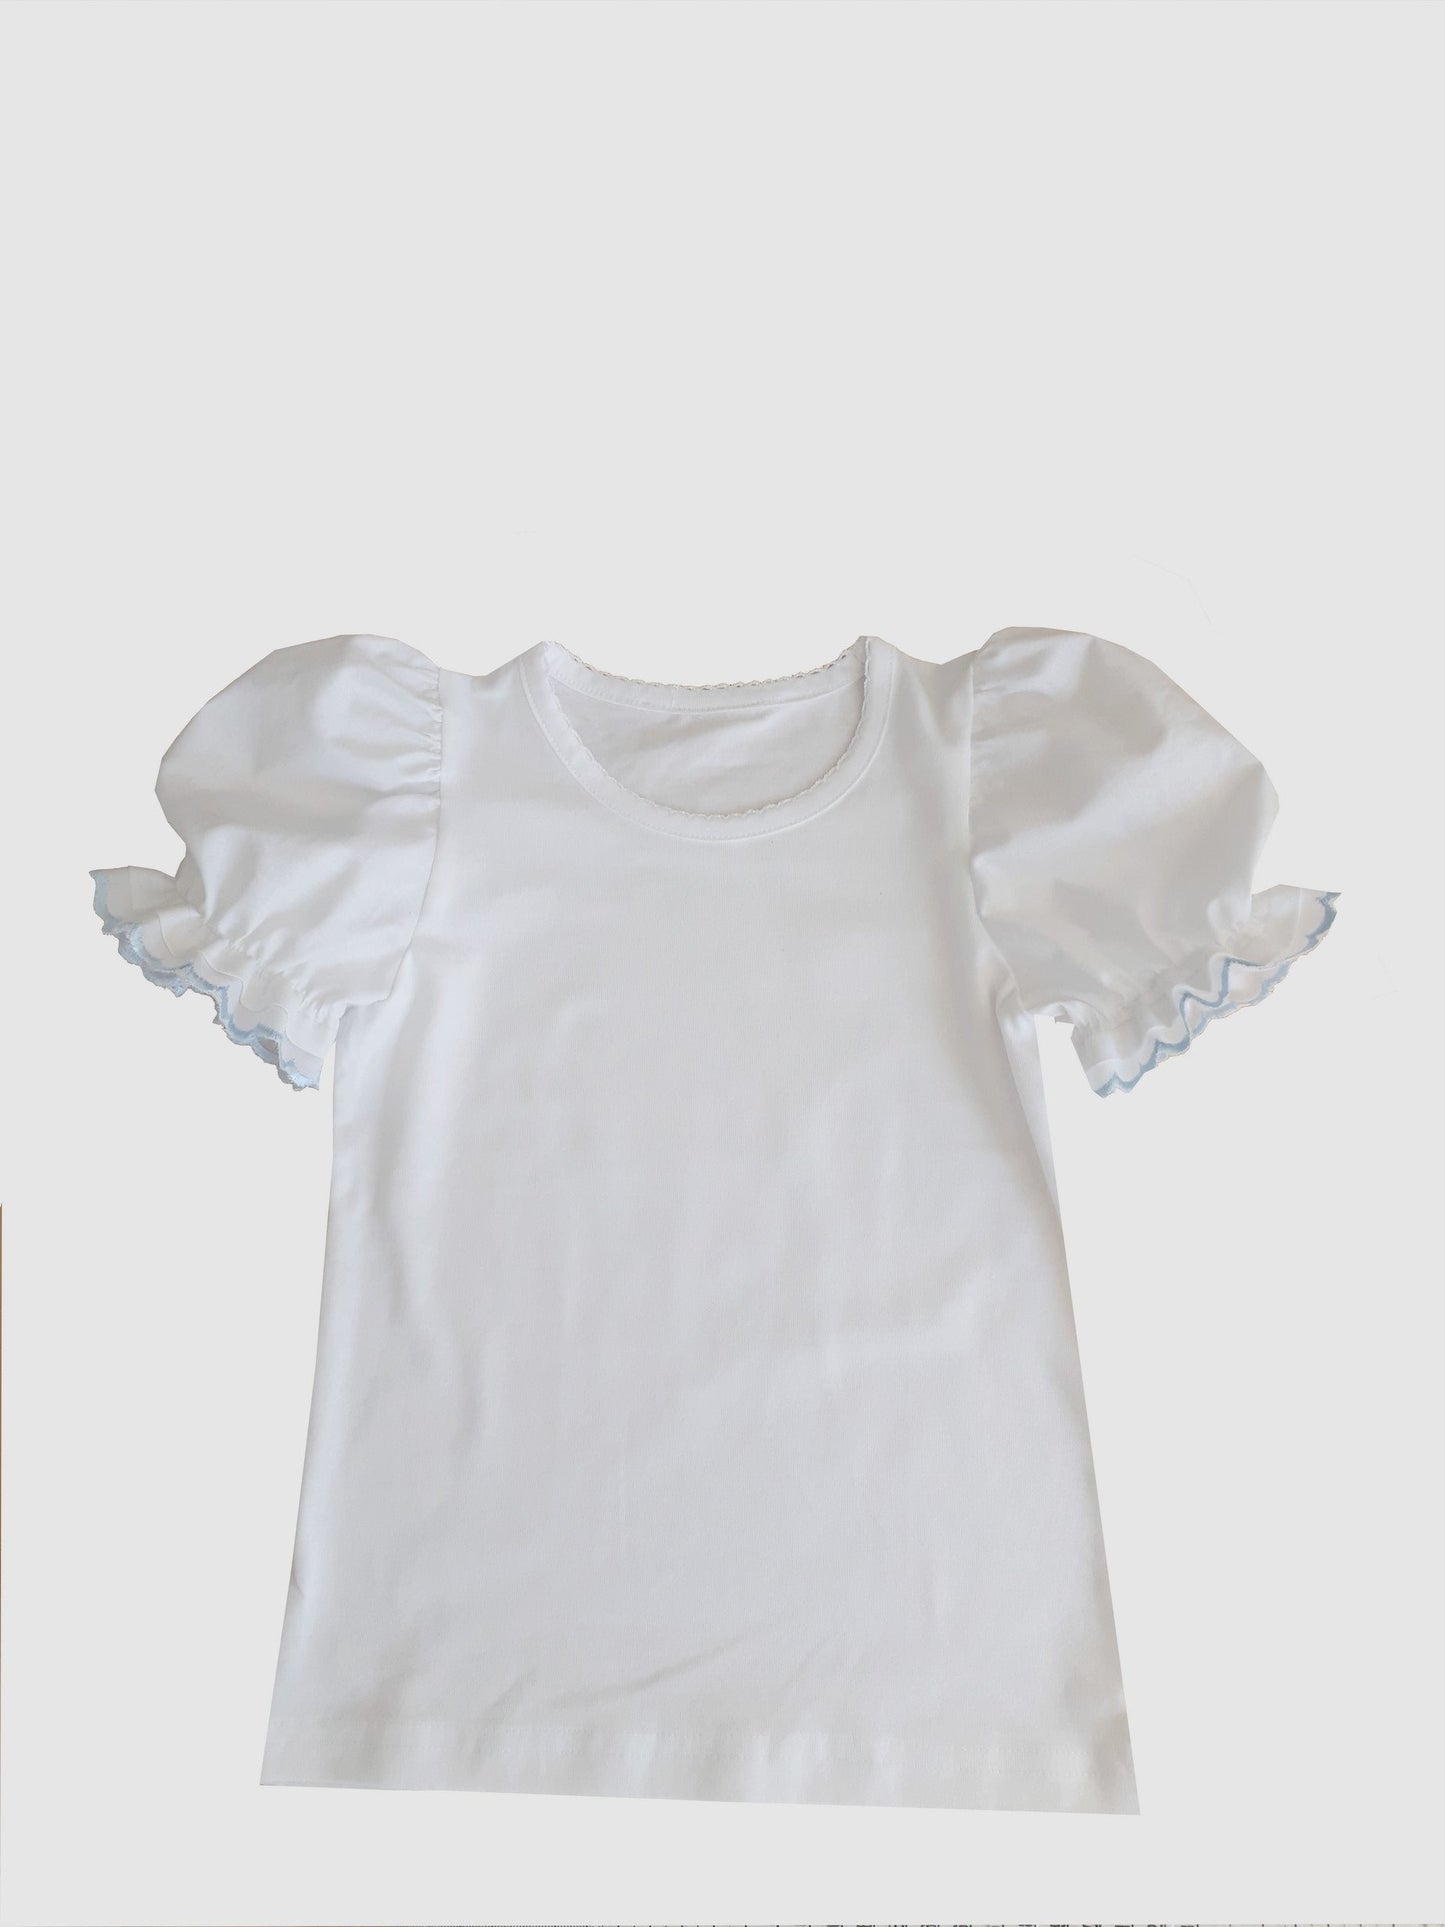 Dirndl shirt white with organic cotton colored lace